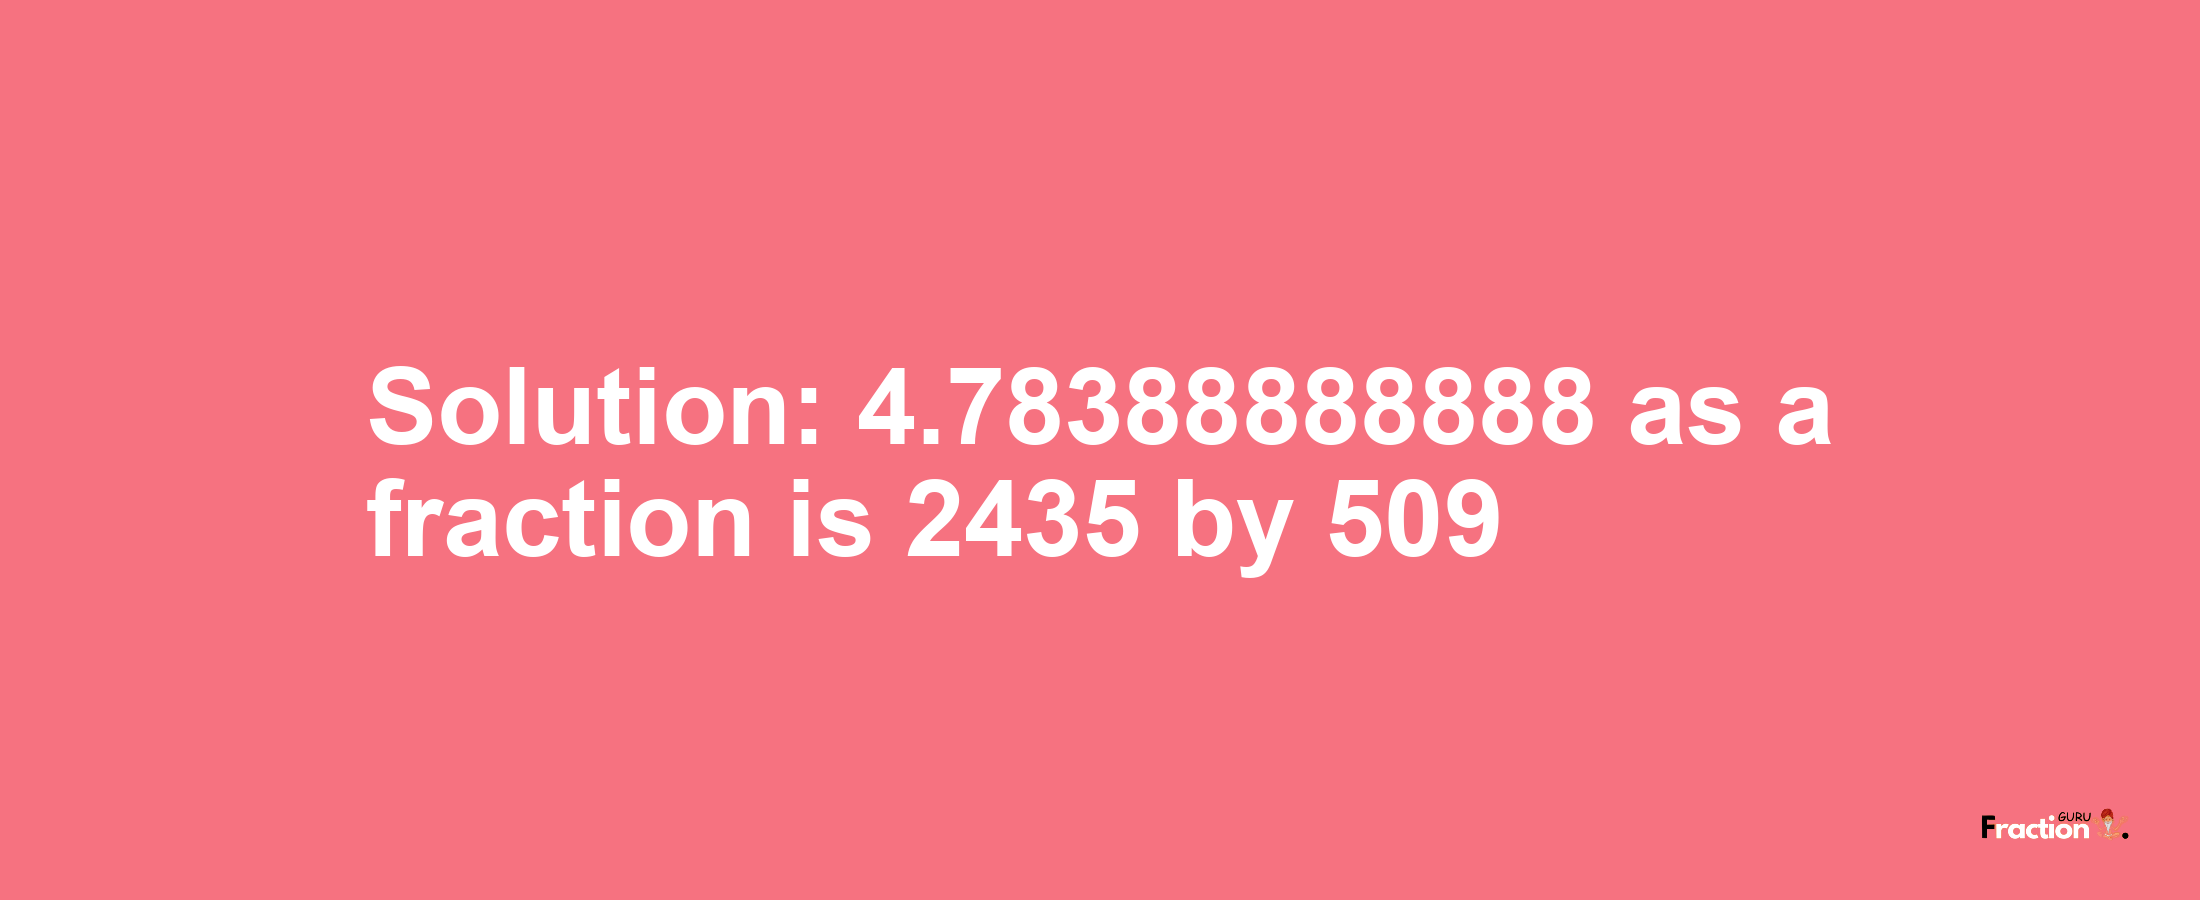 Solution:4.78388888888 as a fraction is 2435/509